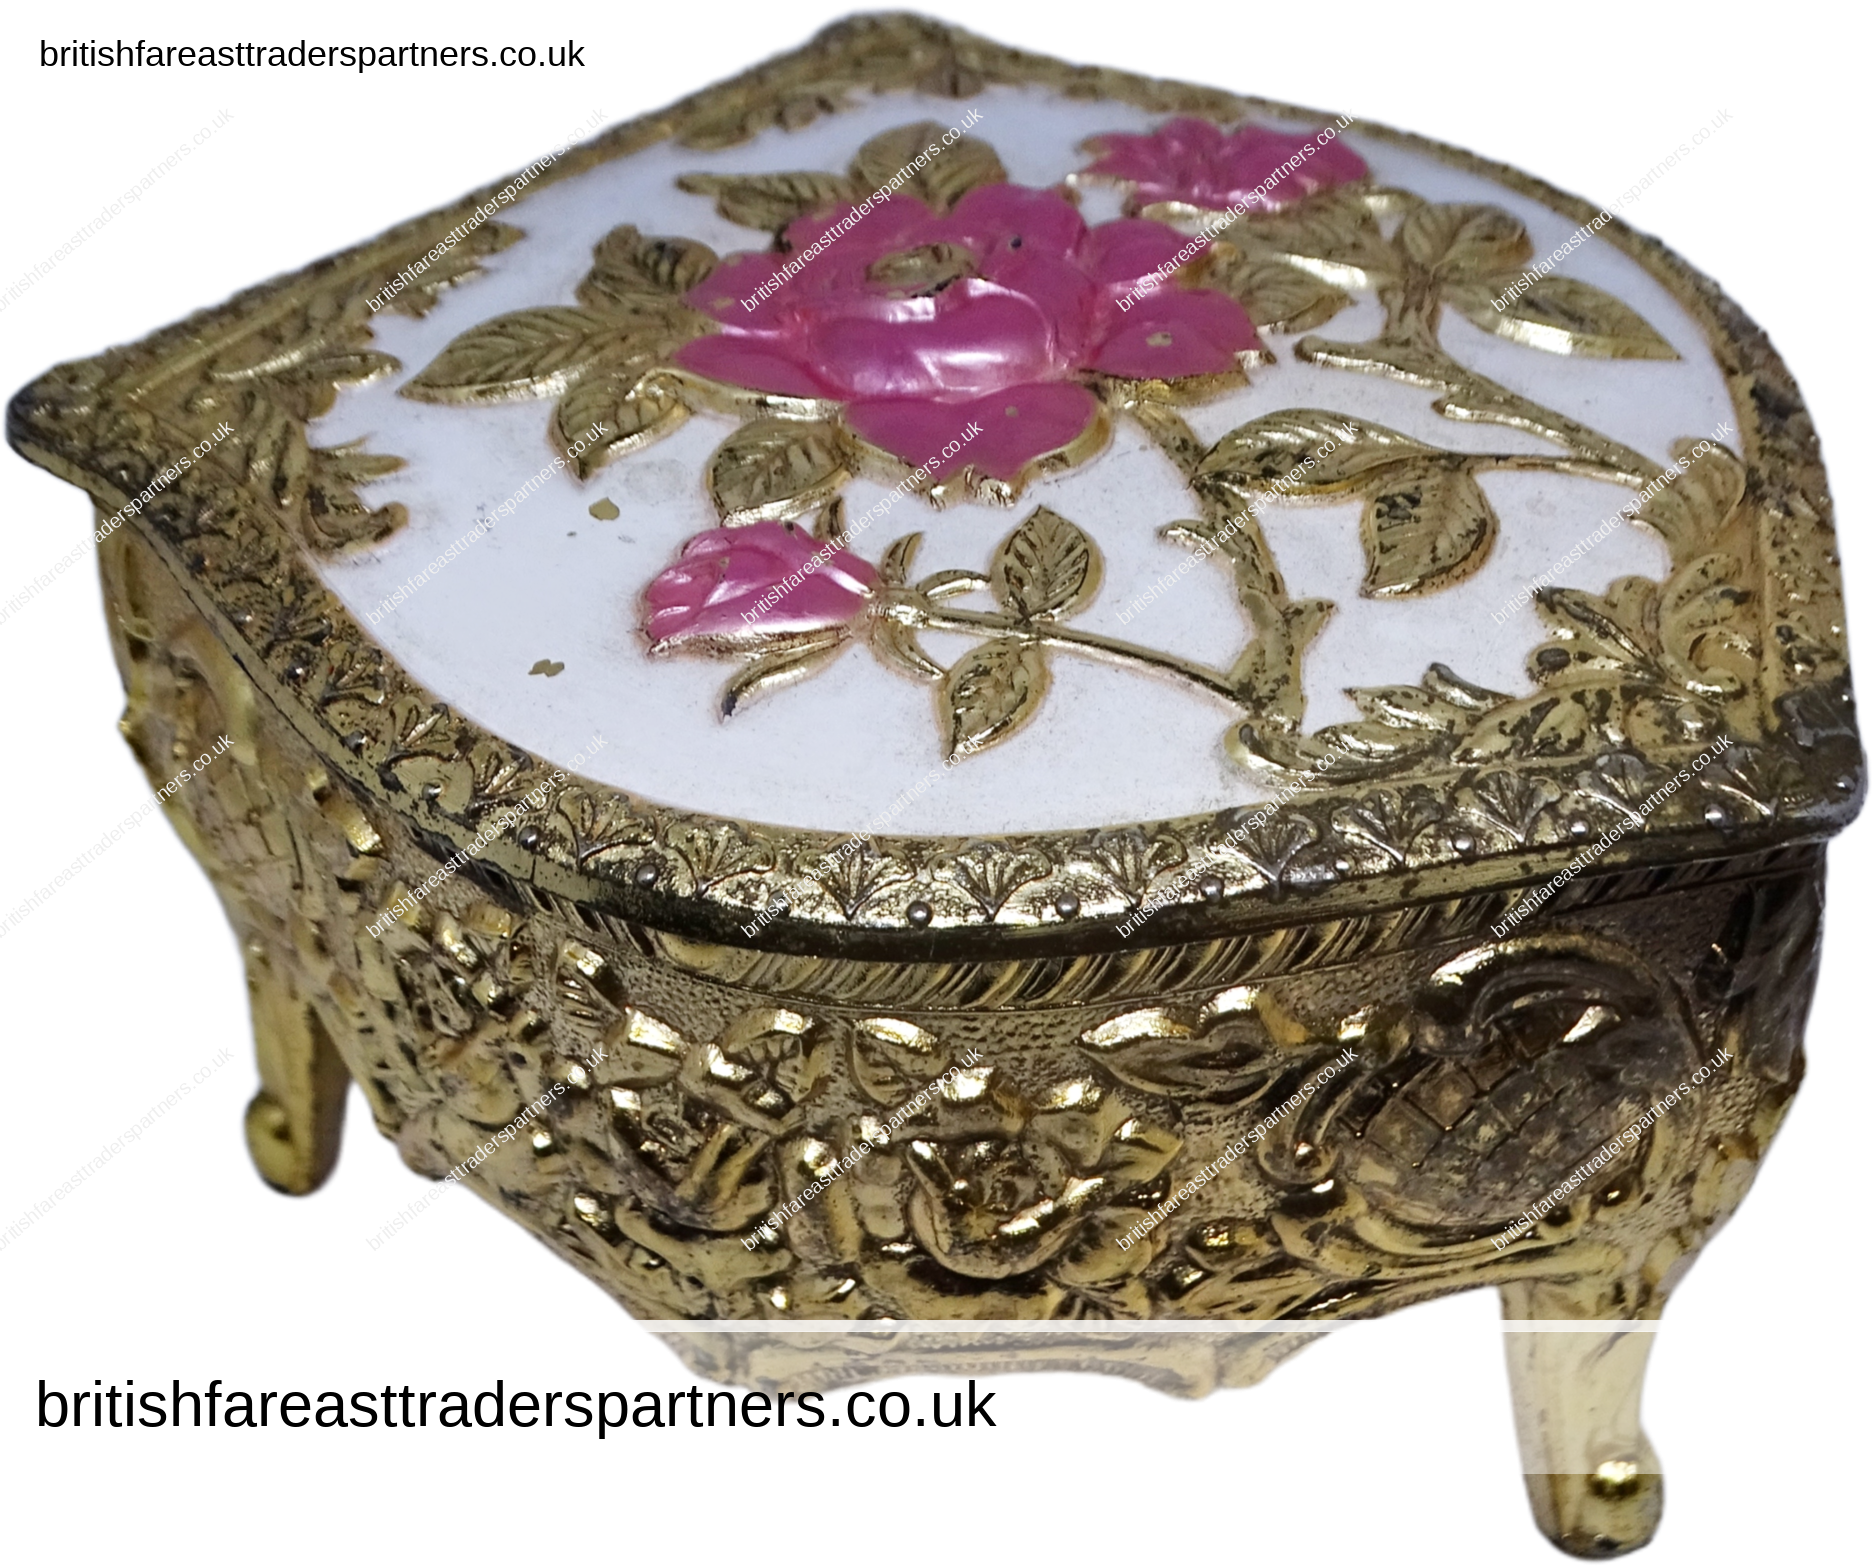 VINTAGE FRENCH ROCOCO / VICTORIAN INSPIRED PINK ROSES FOOTED GOLD TONE JEWELLERY TRINKET BOX VINTAGE | VANITY | DECORATIVE COLLECTABLES | FASHION | LIFESTYLE | ROCOCO | VICTORIAN